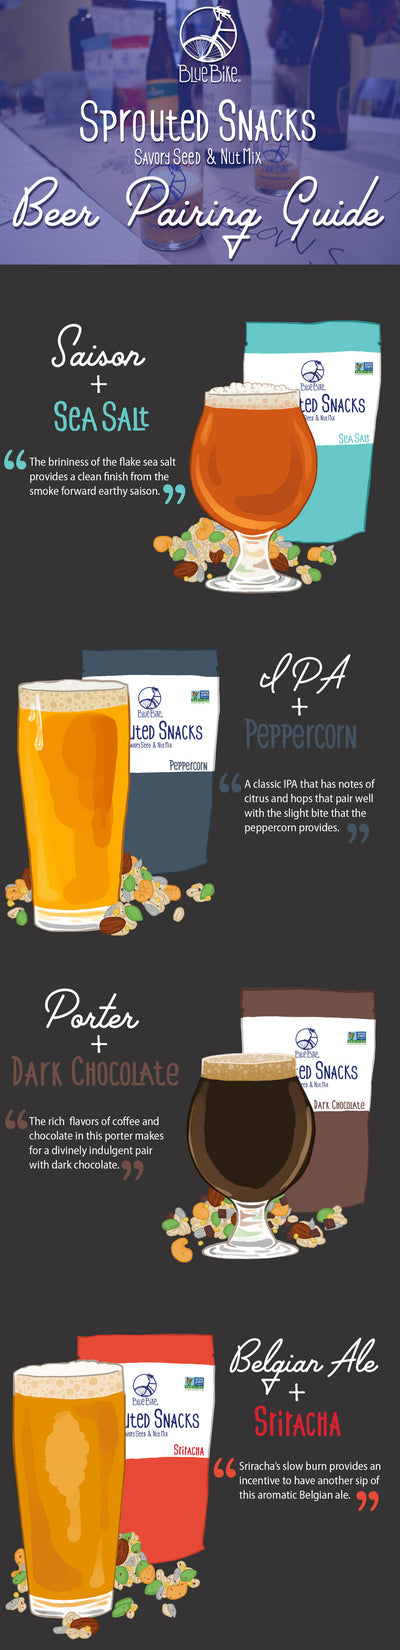 Beer Pairings with Blue Bike® Sprouted Snacks